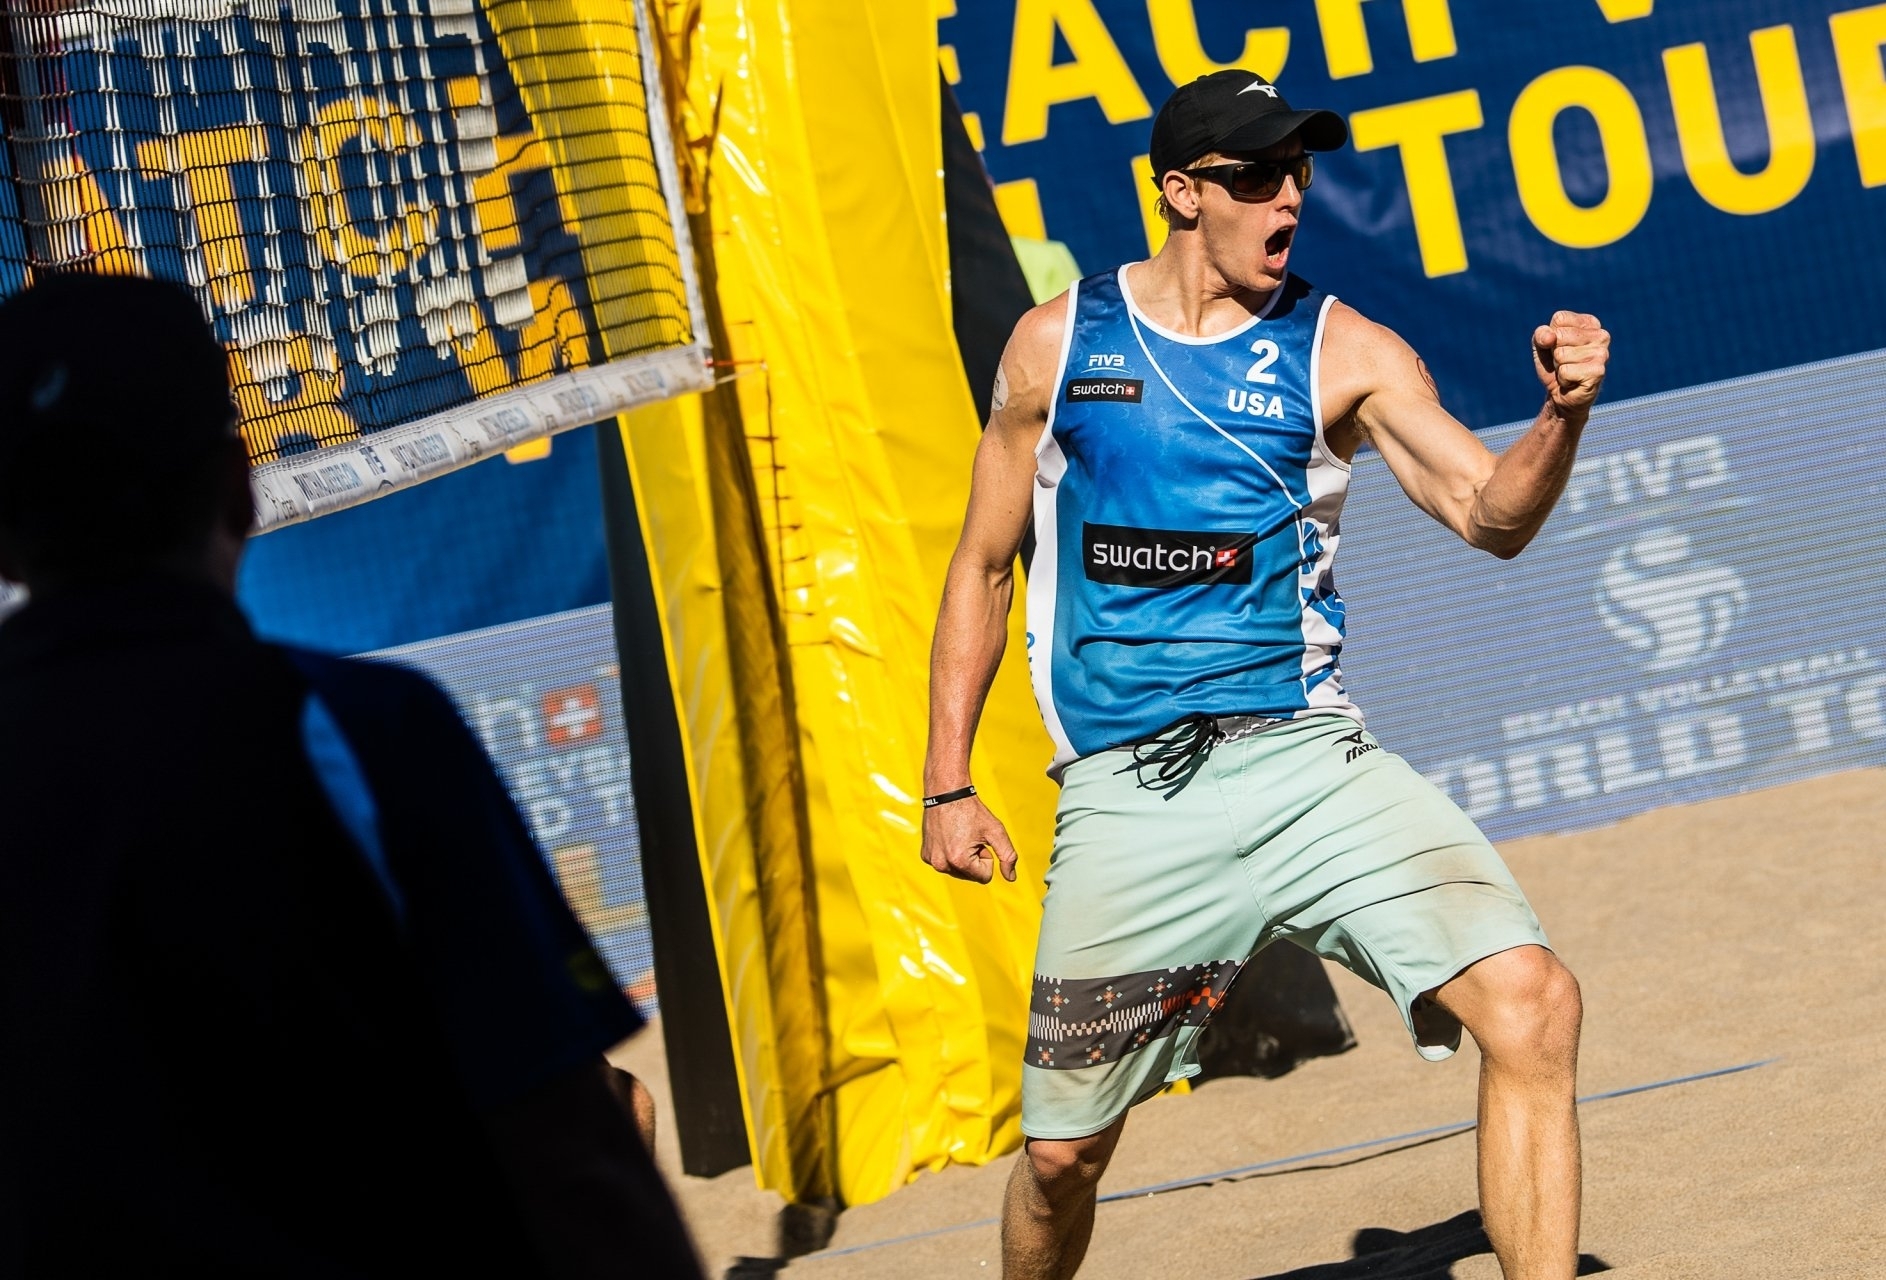 Tri in typical celebratory mode during the Beach Majors Toronto Finals in 2016